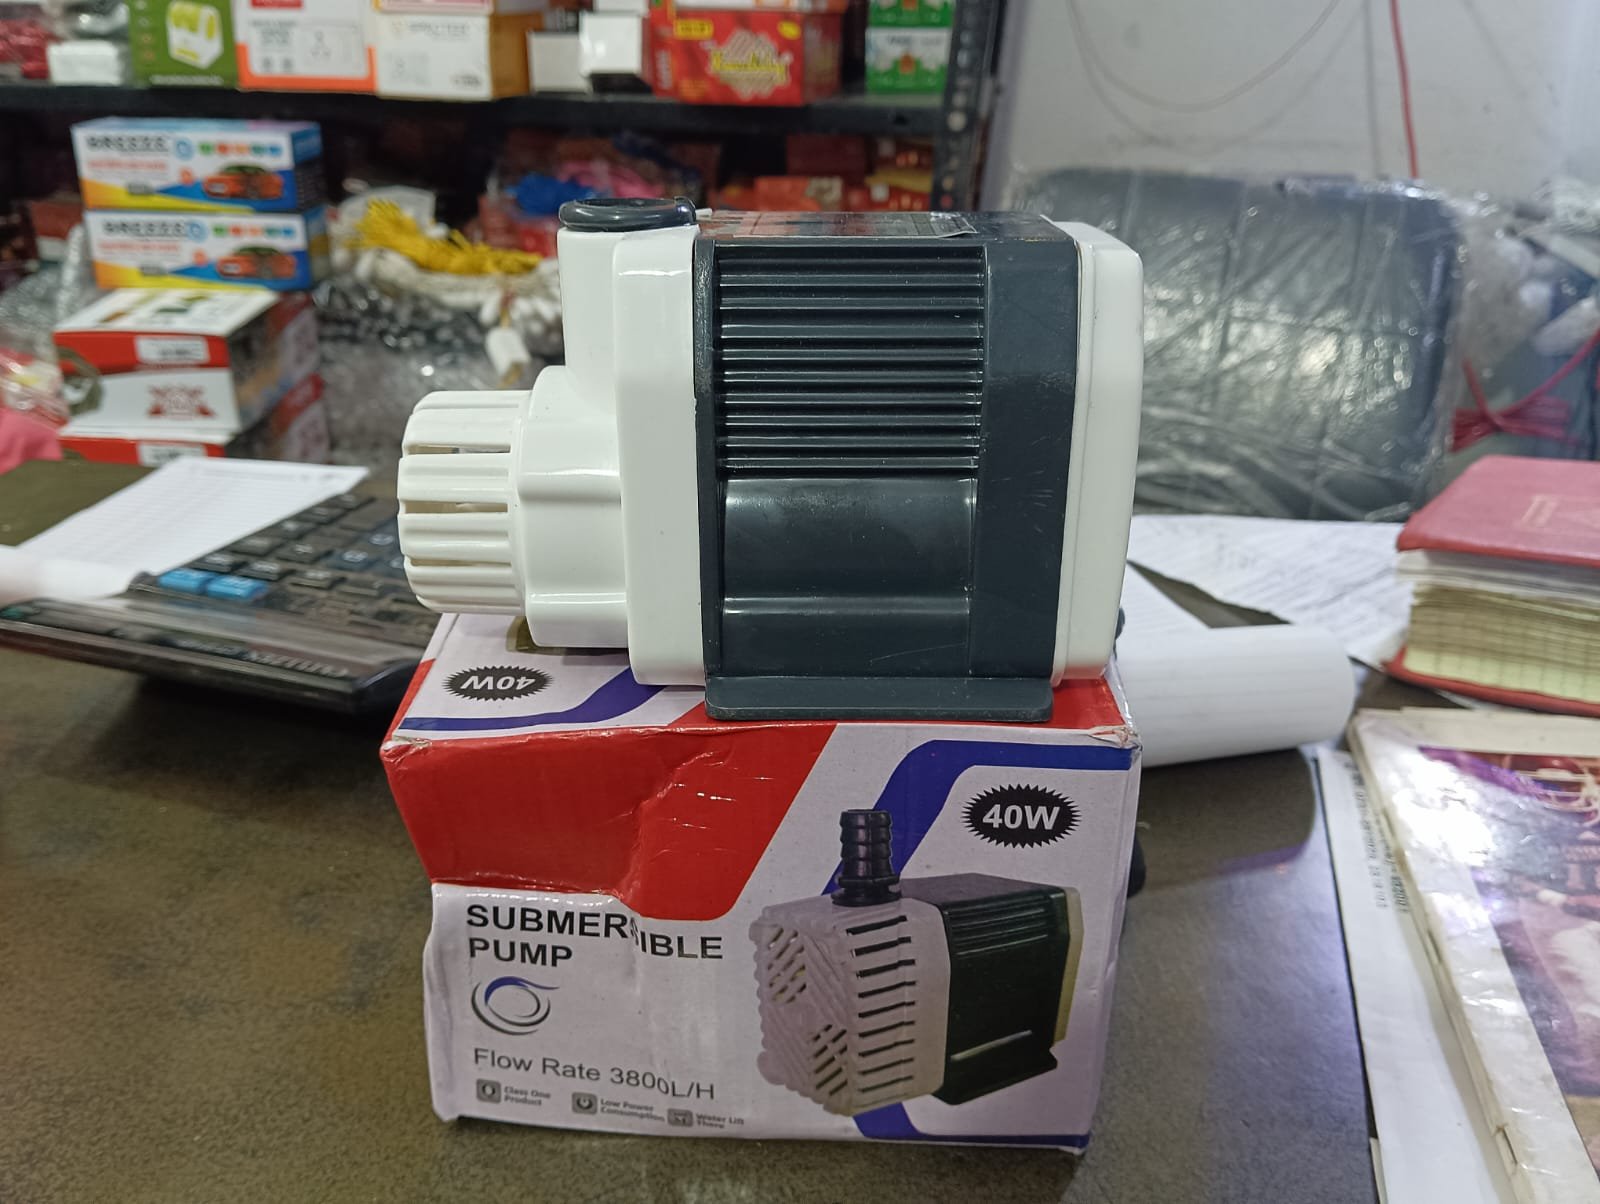 COOLER PUMP 40 W, Fortuner Make (Product Image Attached in mail)